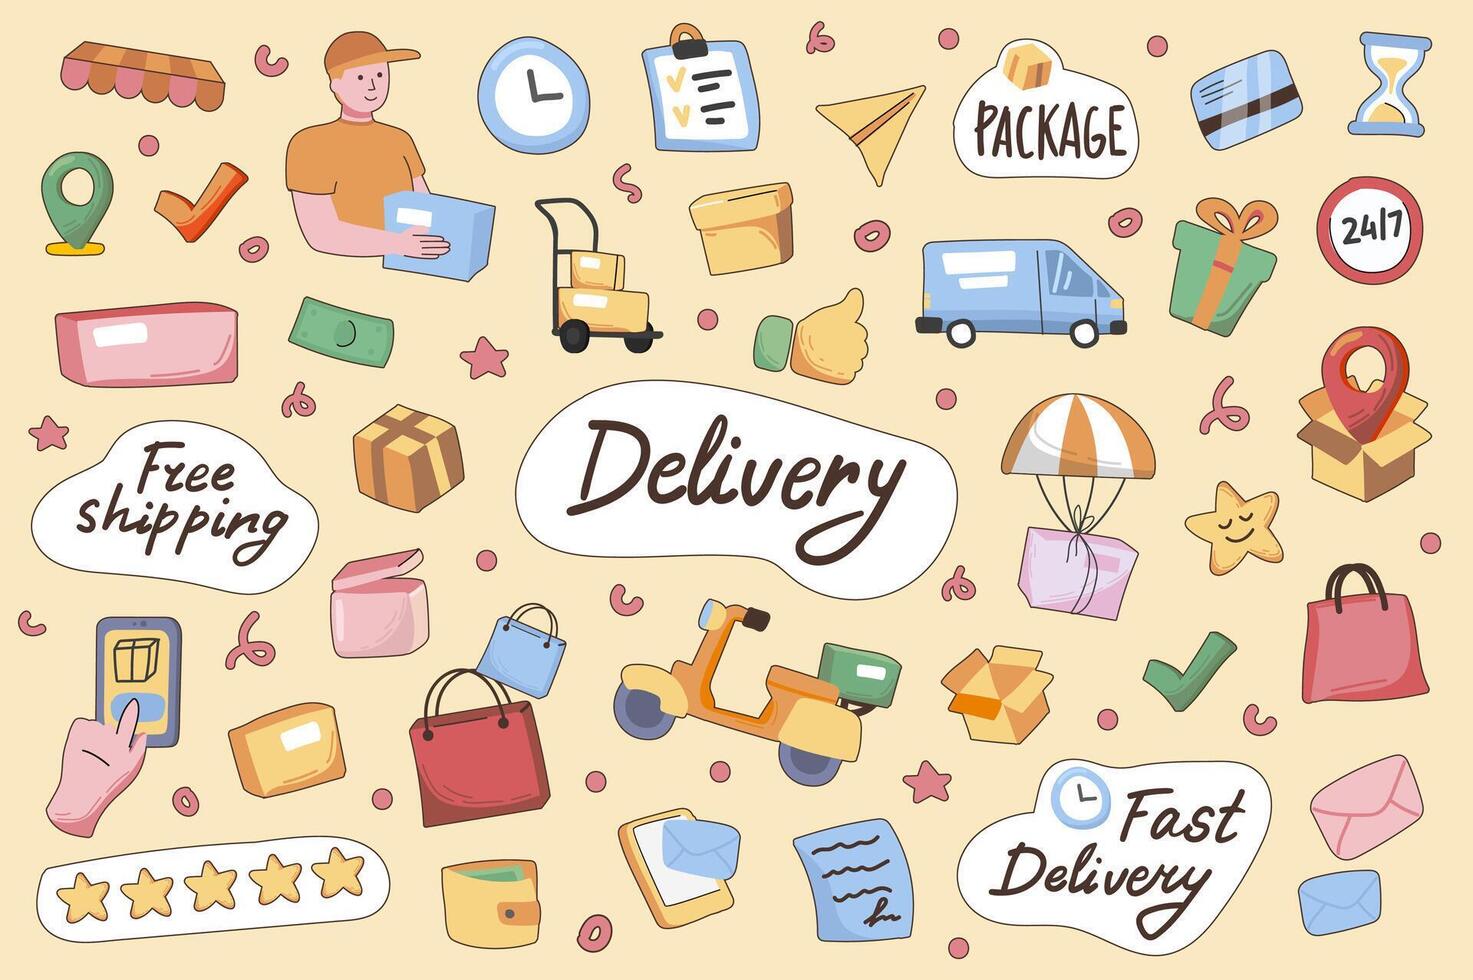 Delivery cute stickers set in flat cartoon design. Collection of courier, truck, motorcycle, package, parcel, bag, order, free shipping and other. Vector illustration for planner or organizer template